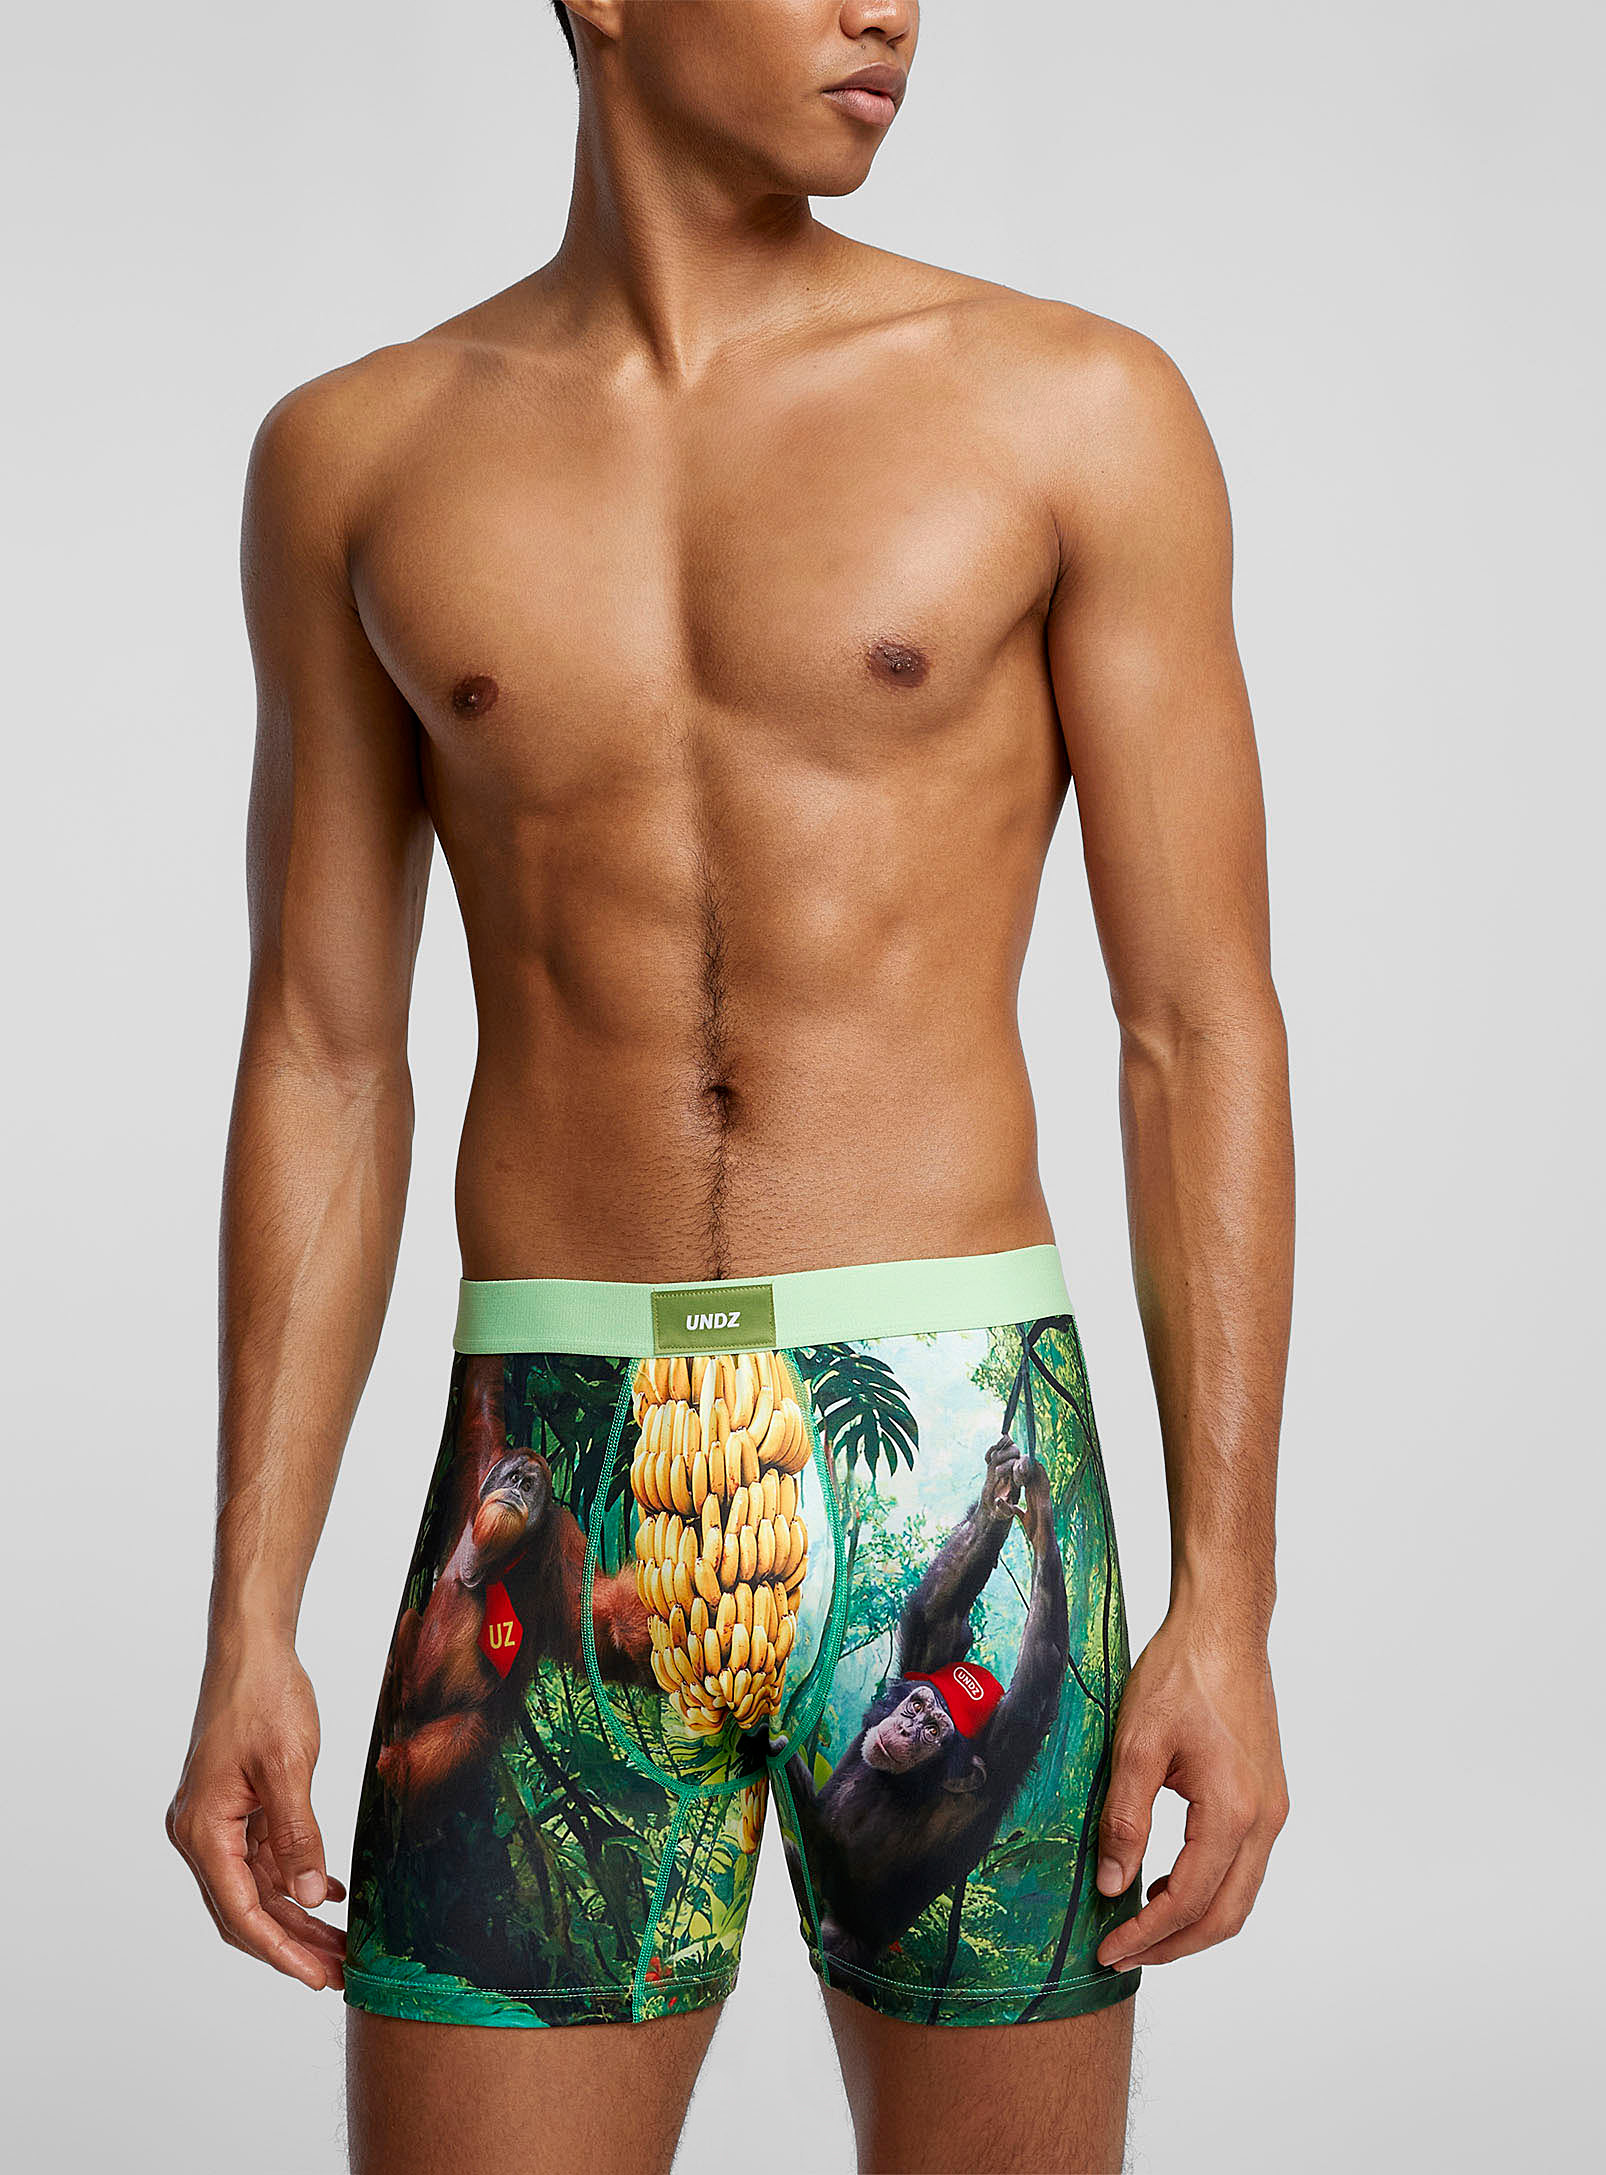 Undz Kong Boxer Brief In Patterned Green